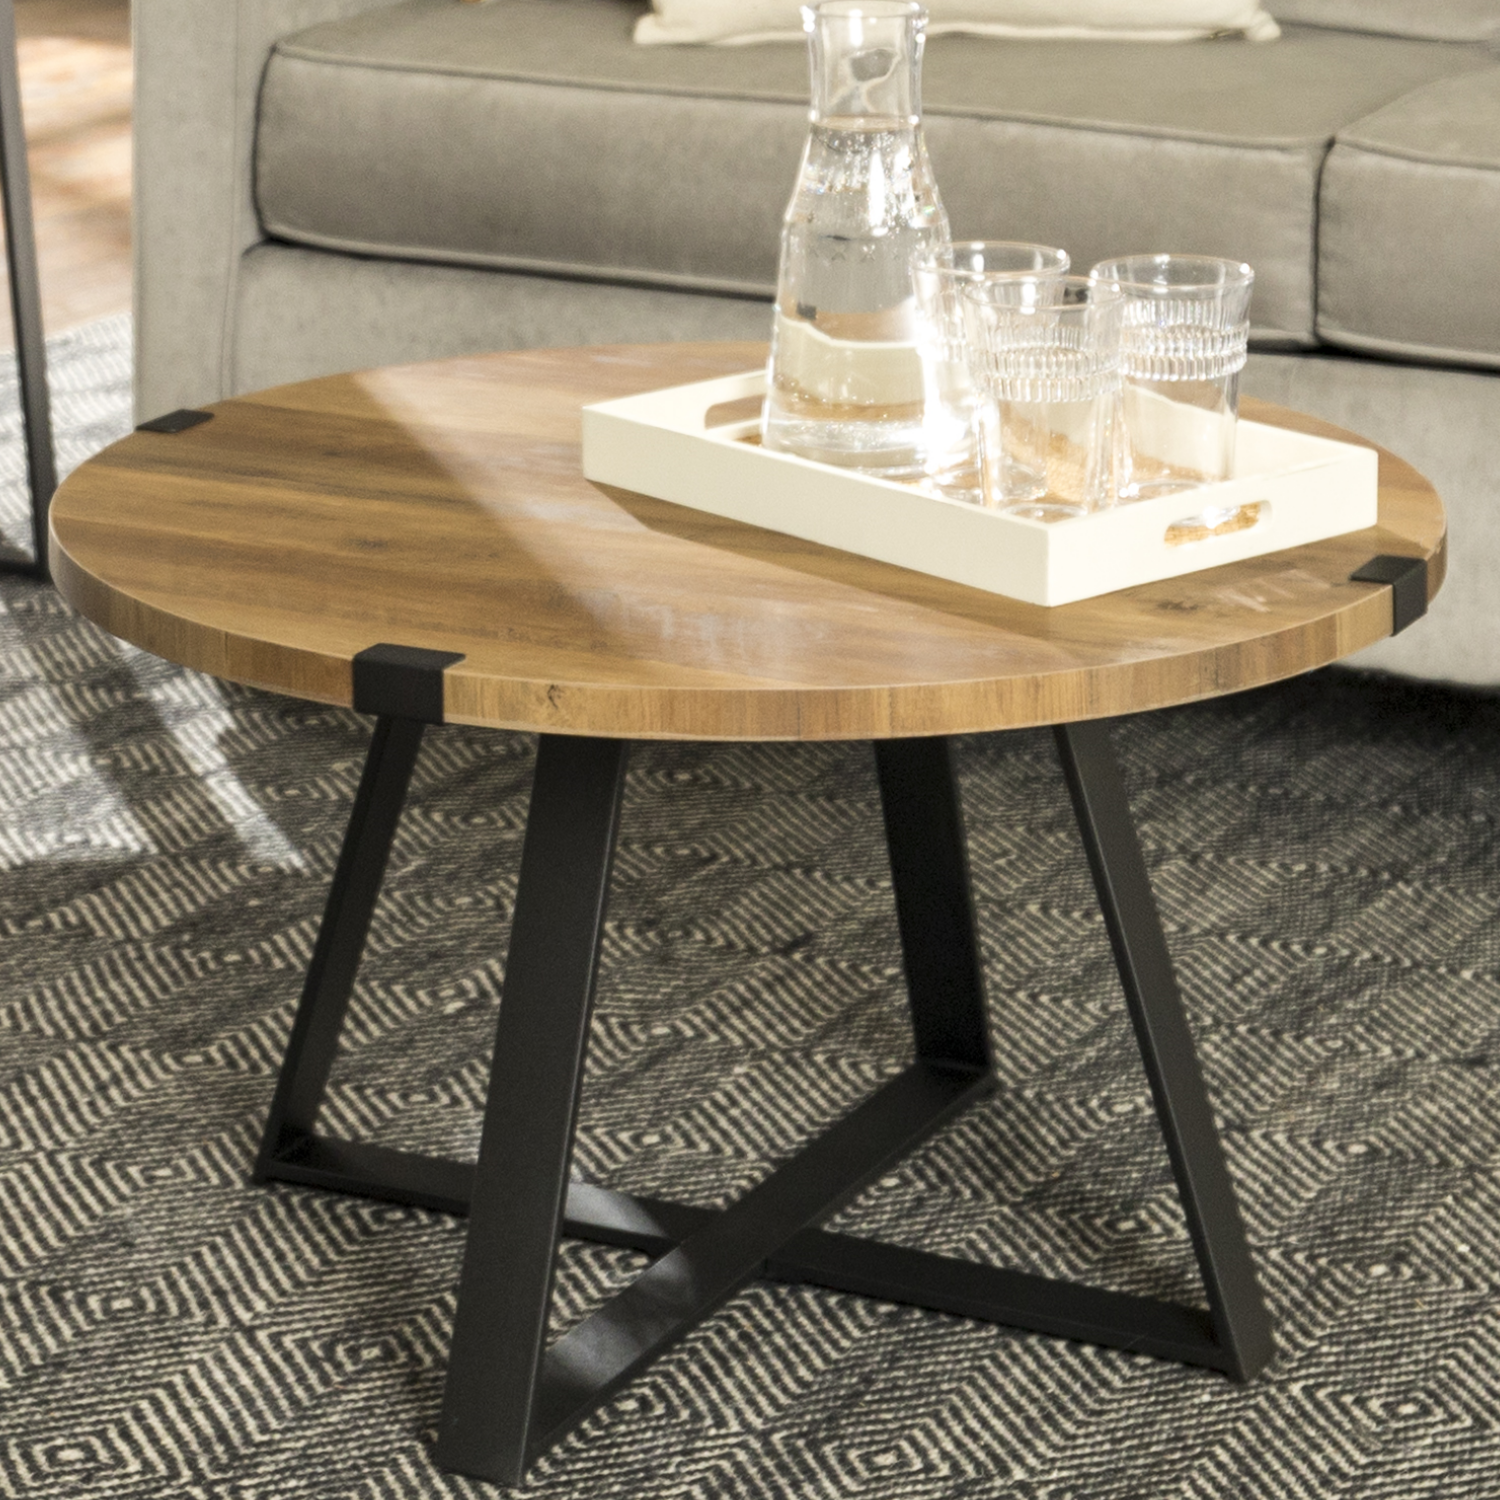 Round Oak Coffee Table With Metal Base, Round Wood Coffee Table Uk